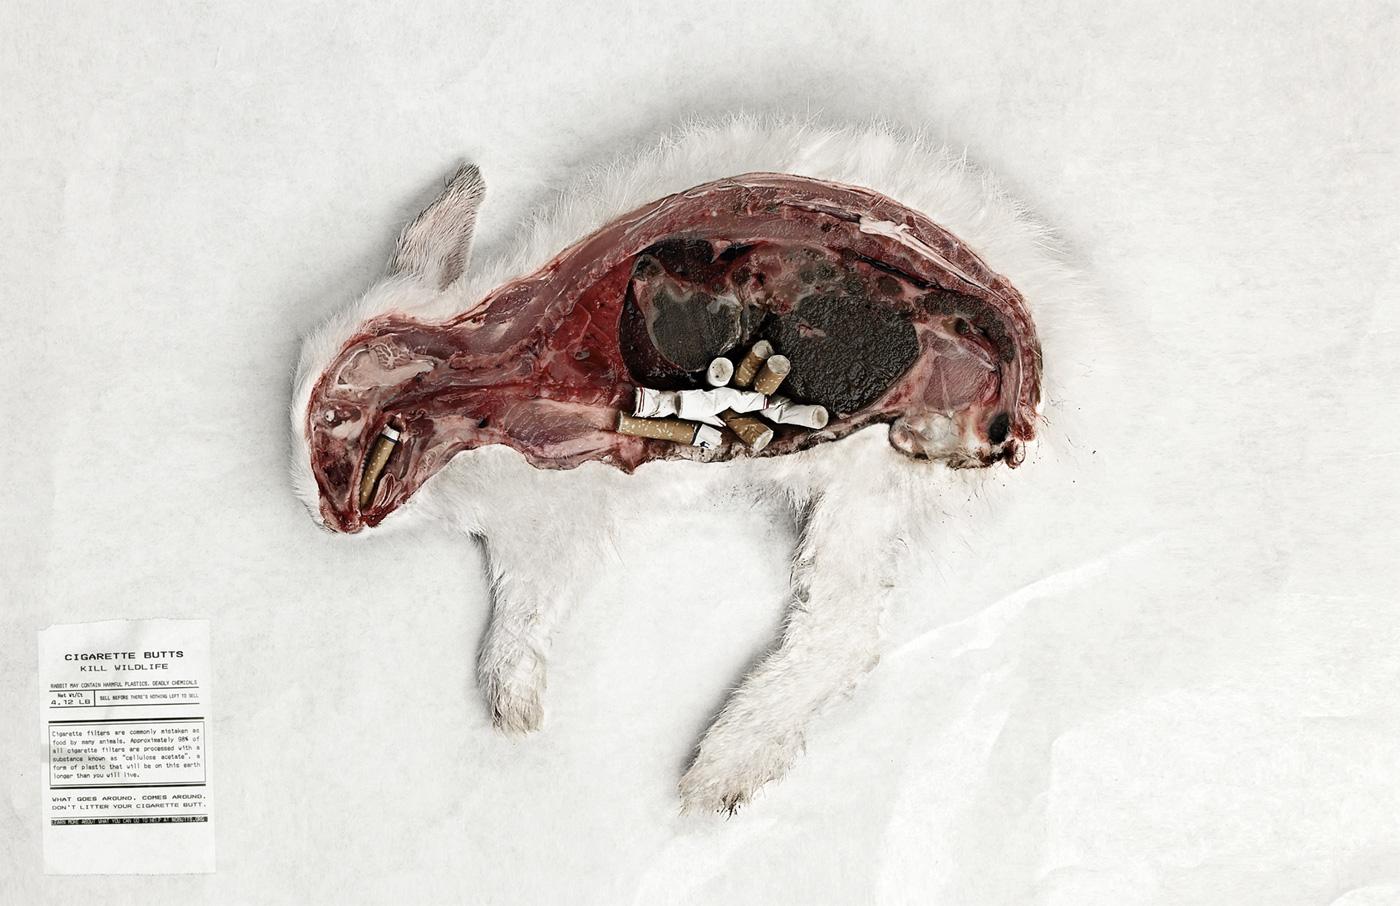 Image of rabbit cut in half so that stomach contents are visible. Stomach is filled with cigarette butts. 